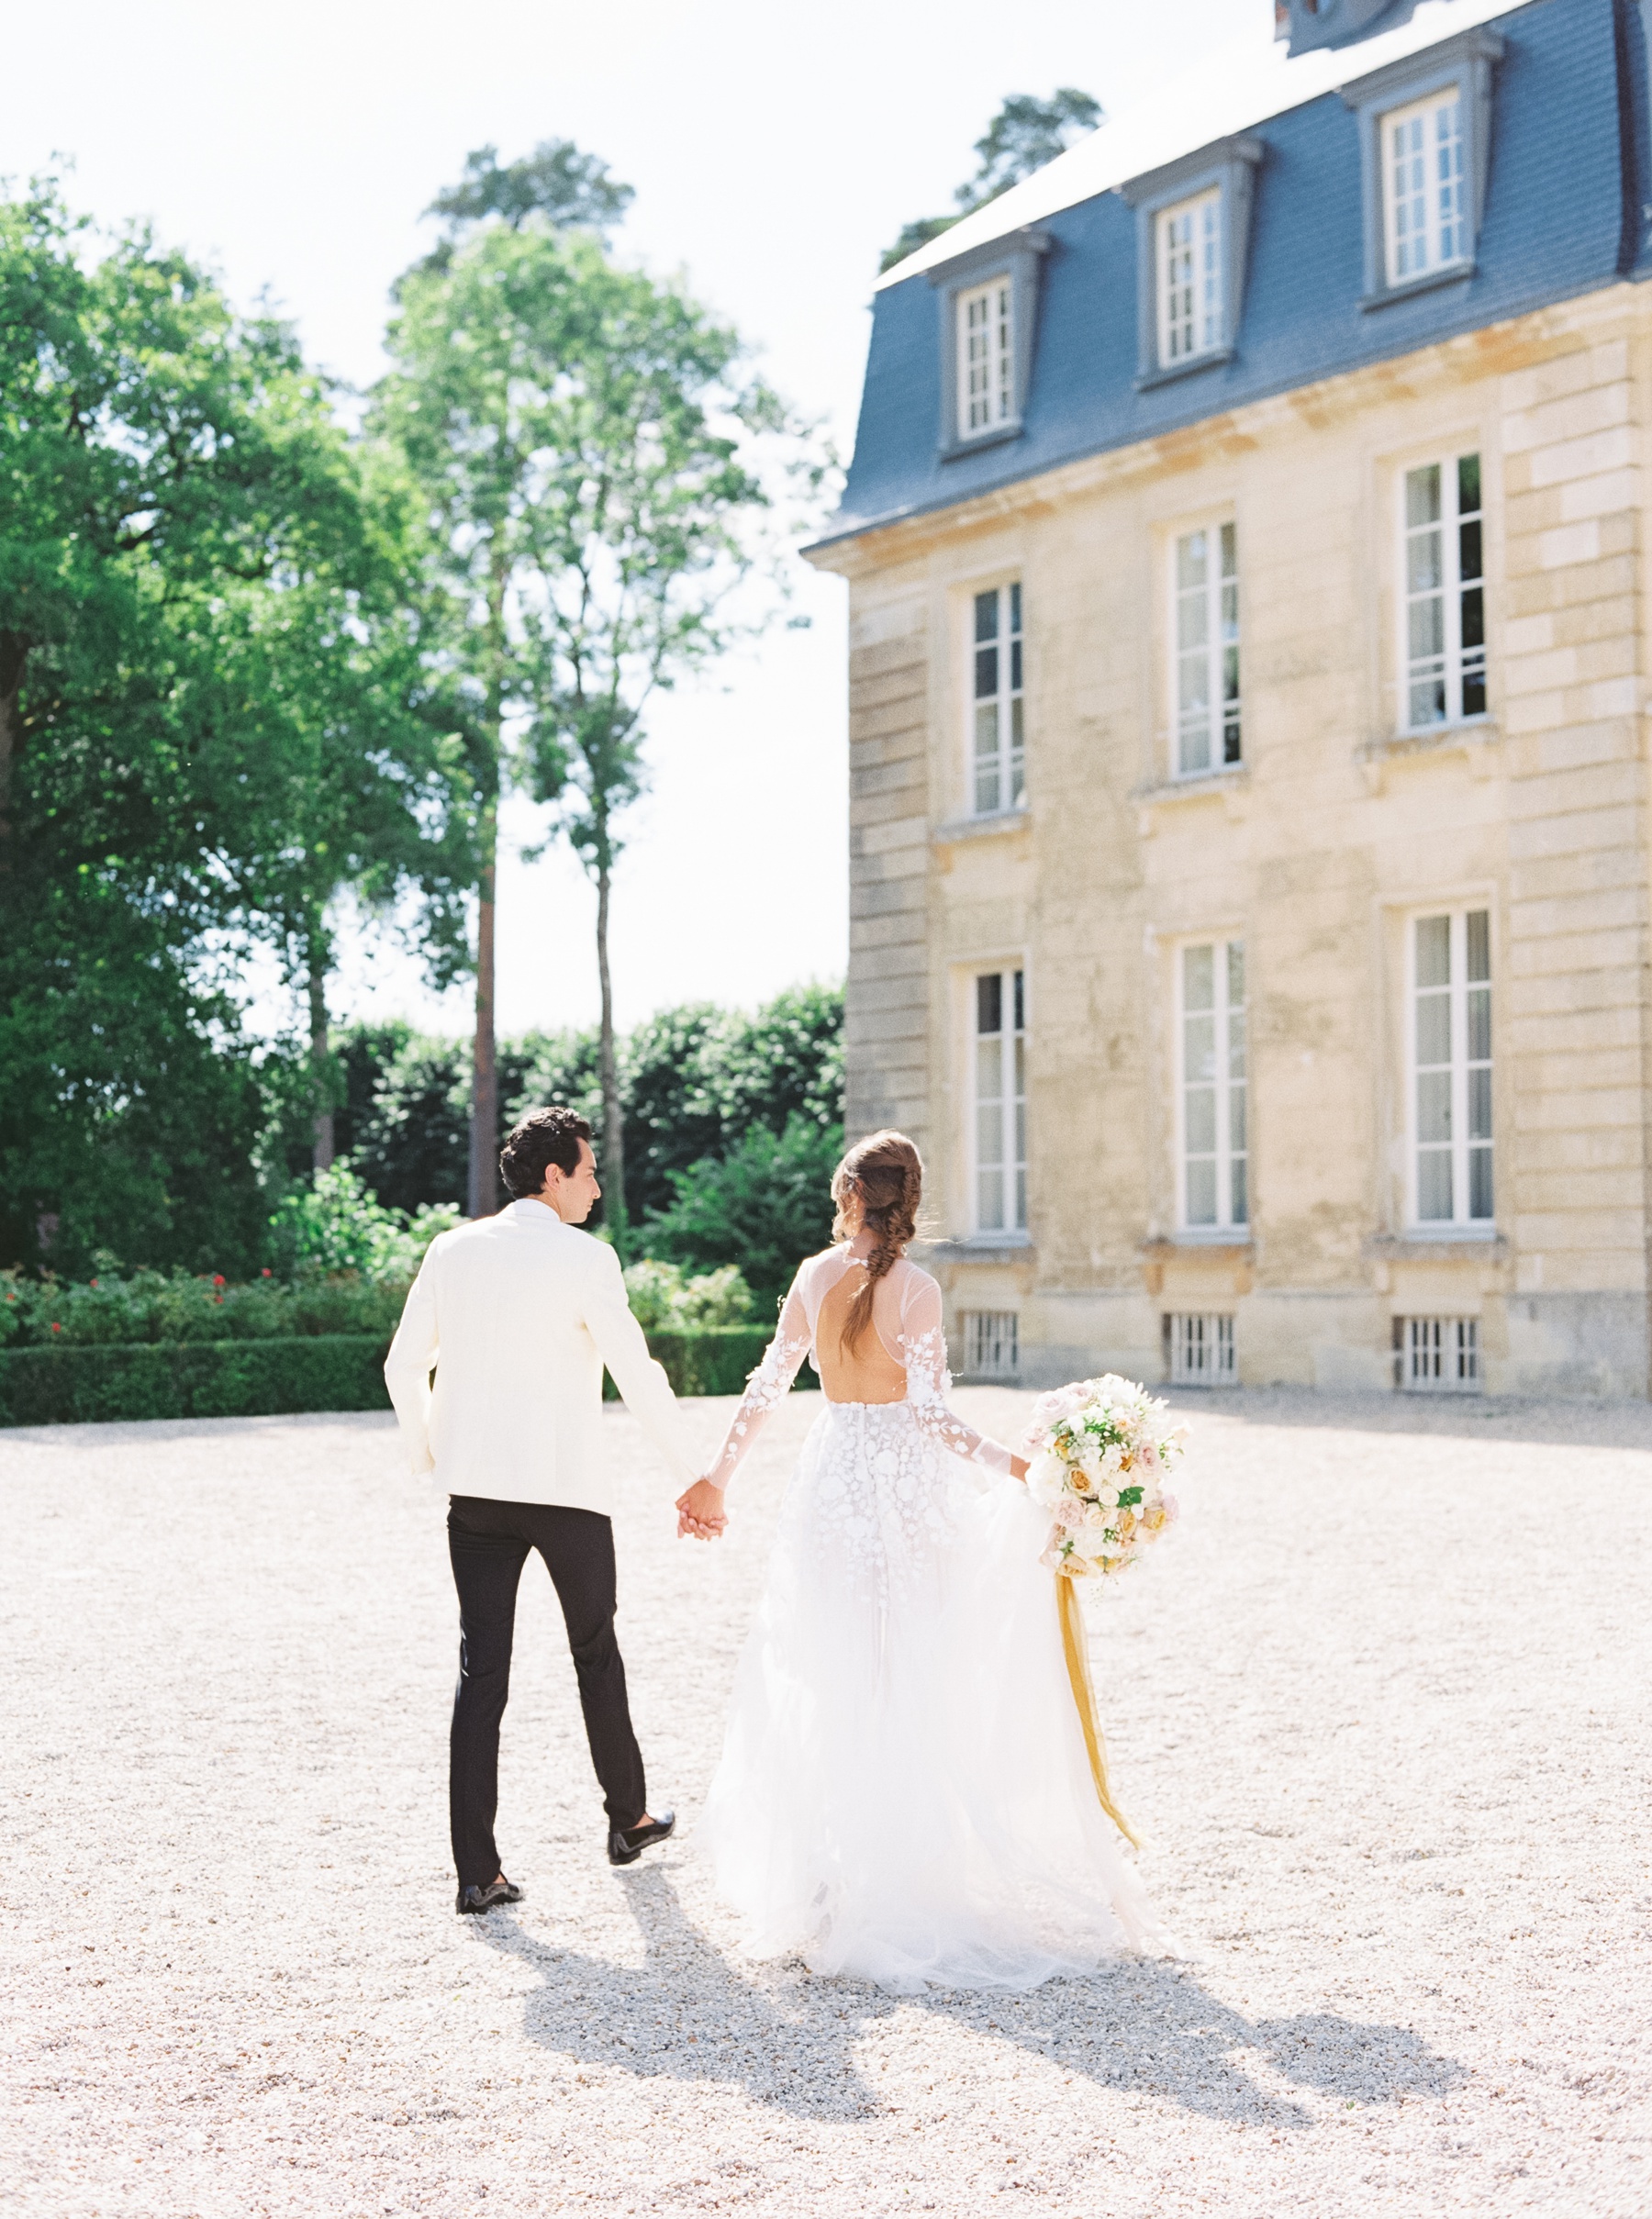 romantic french chateau wedding normandy france